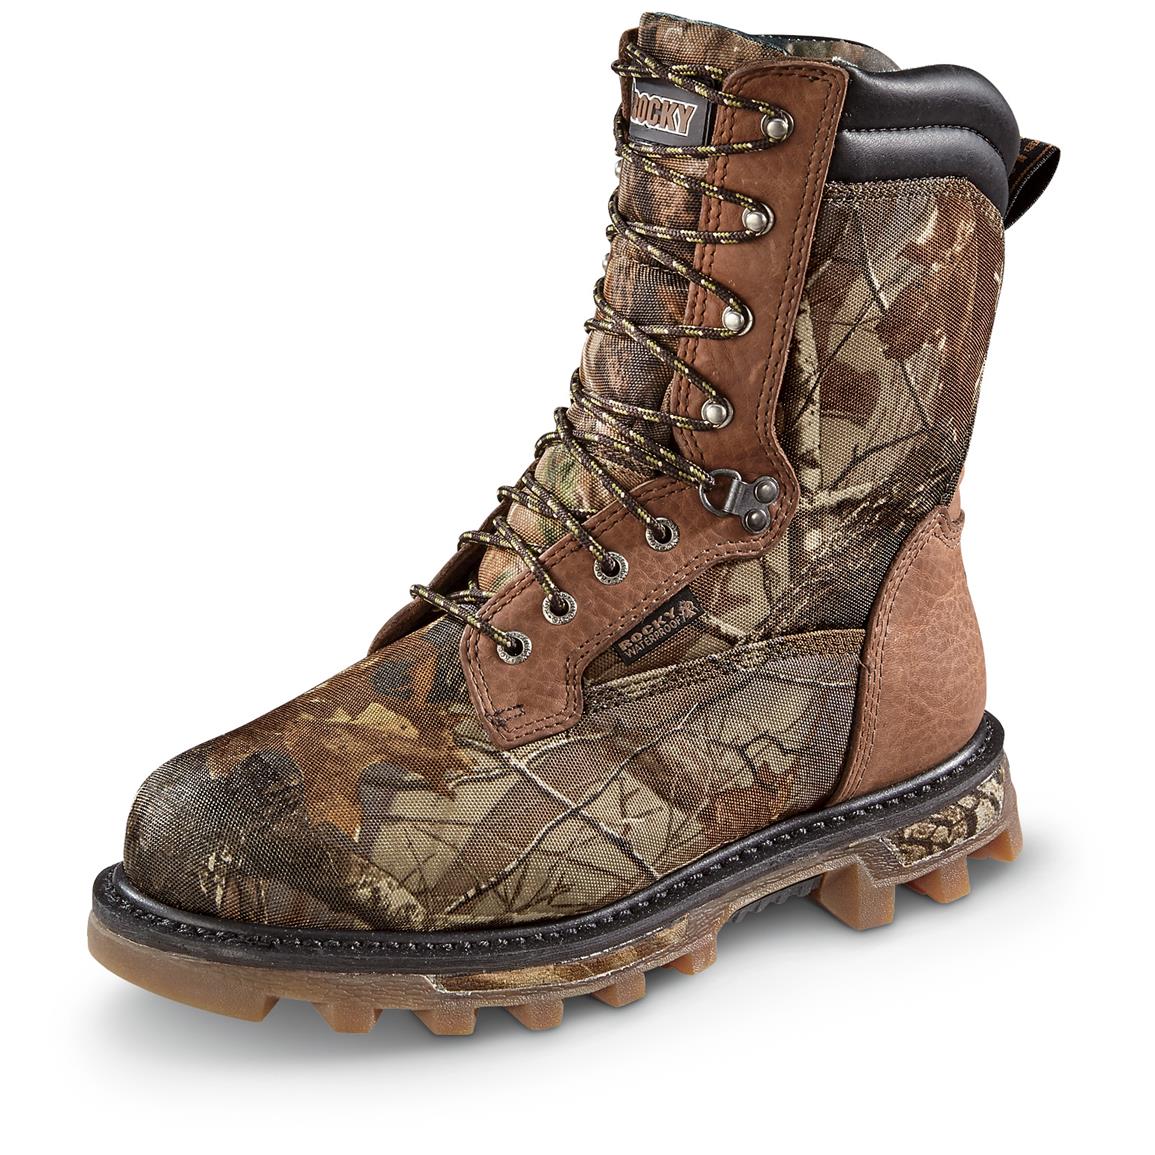 Rocky BearClaw 800 gram Thinsulate Insulated Waterproof Hunting Boots ...